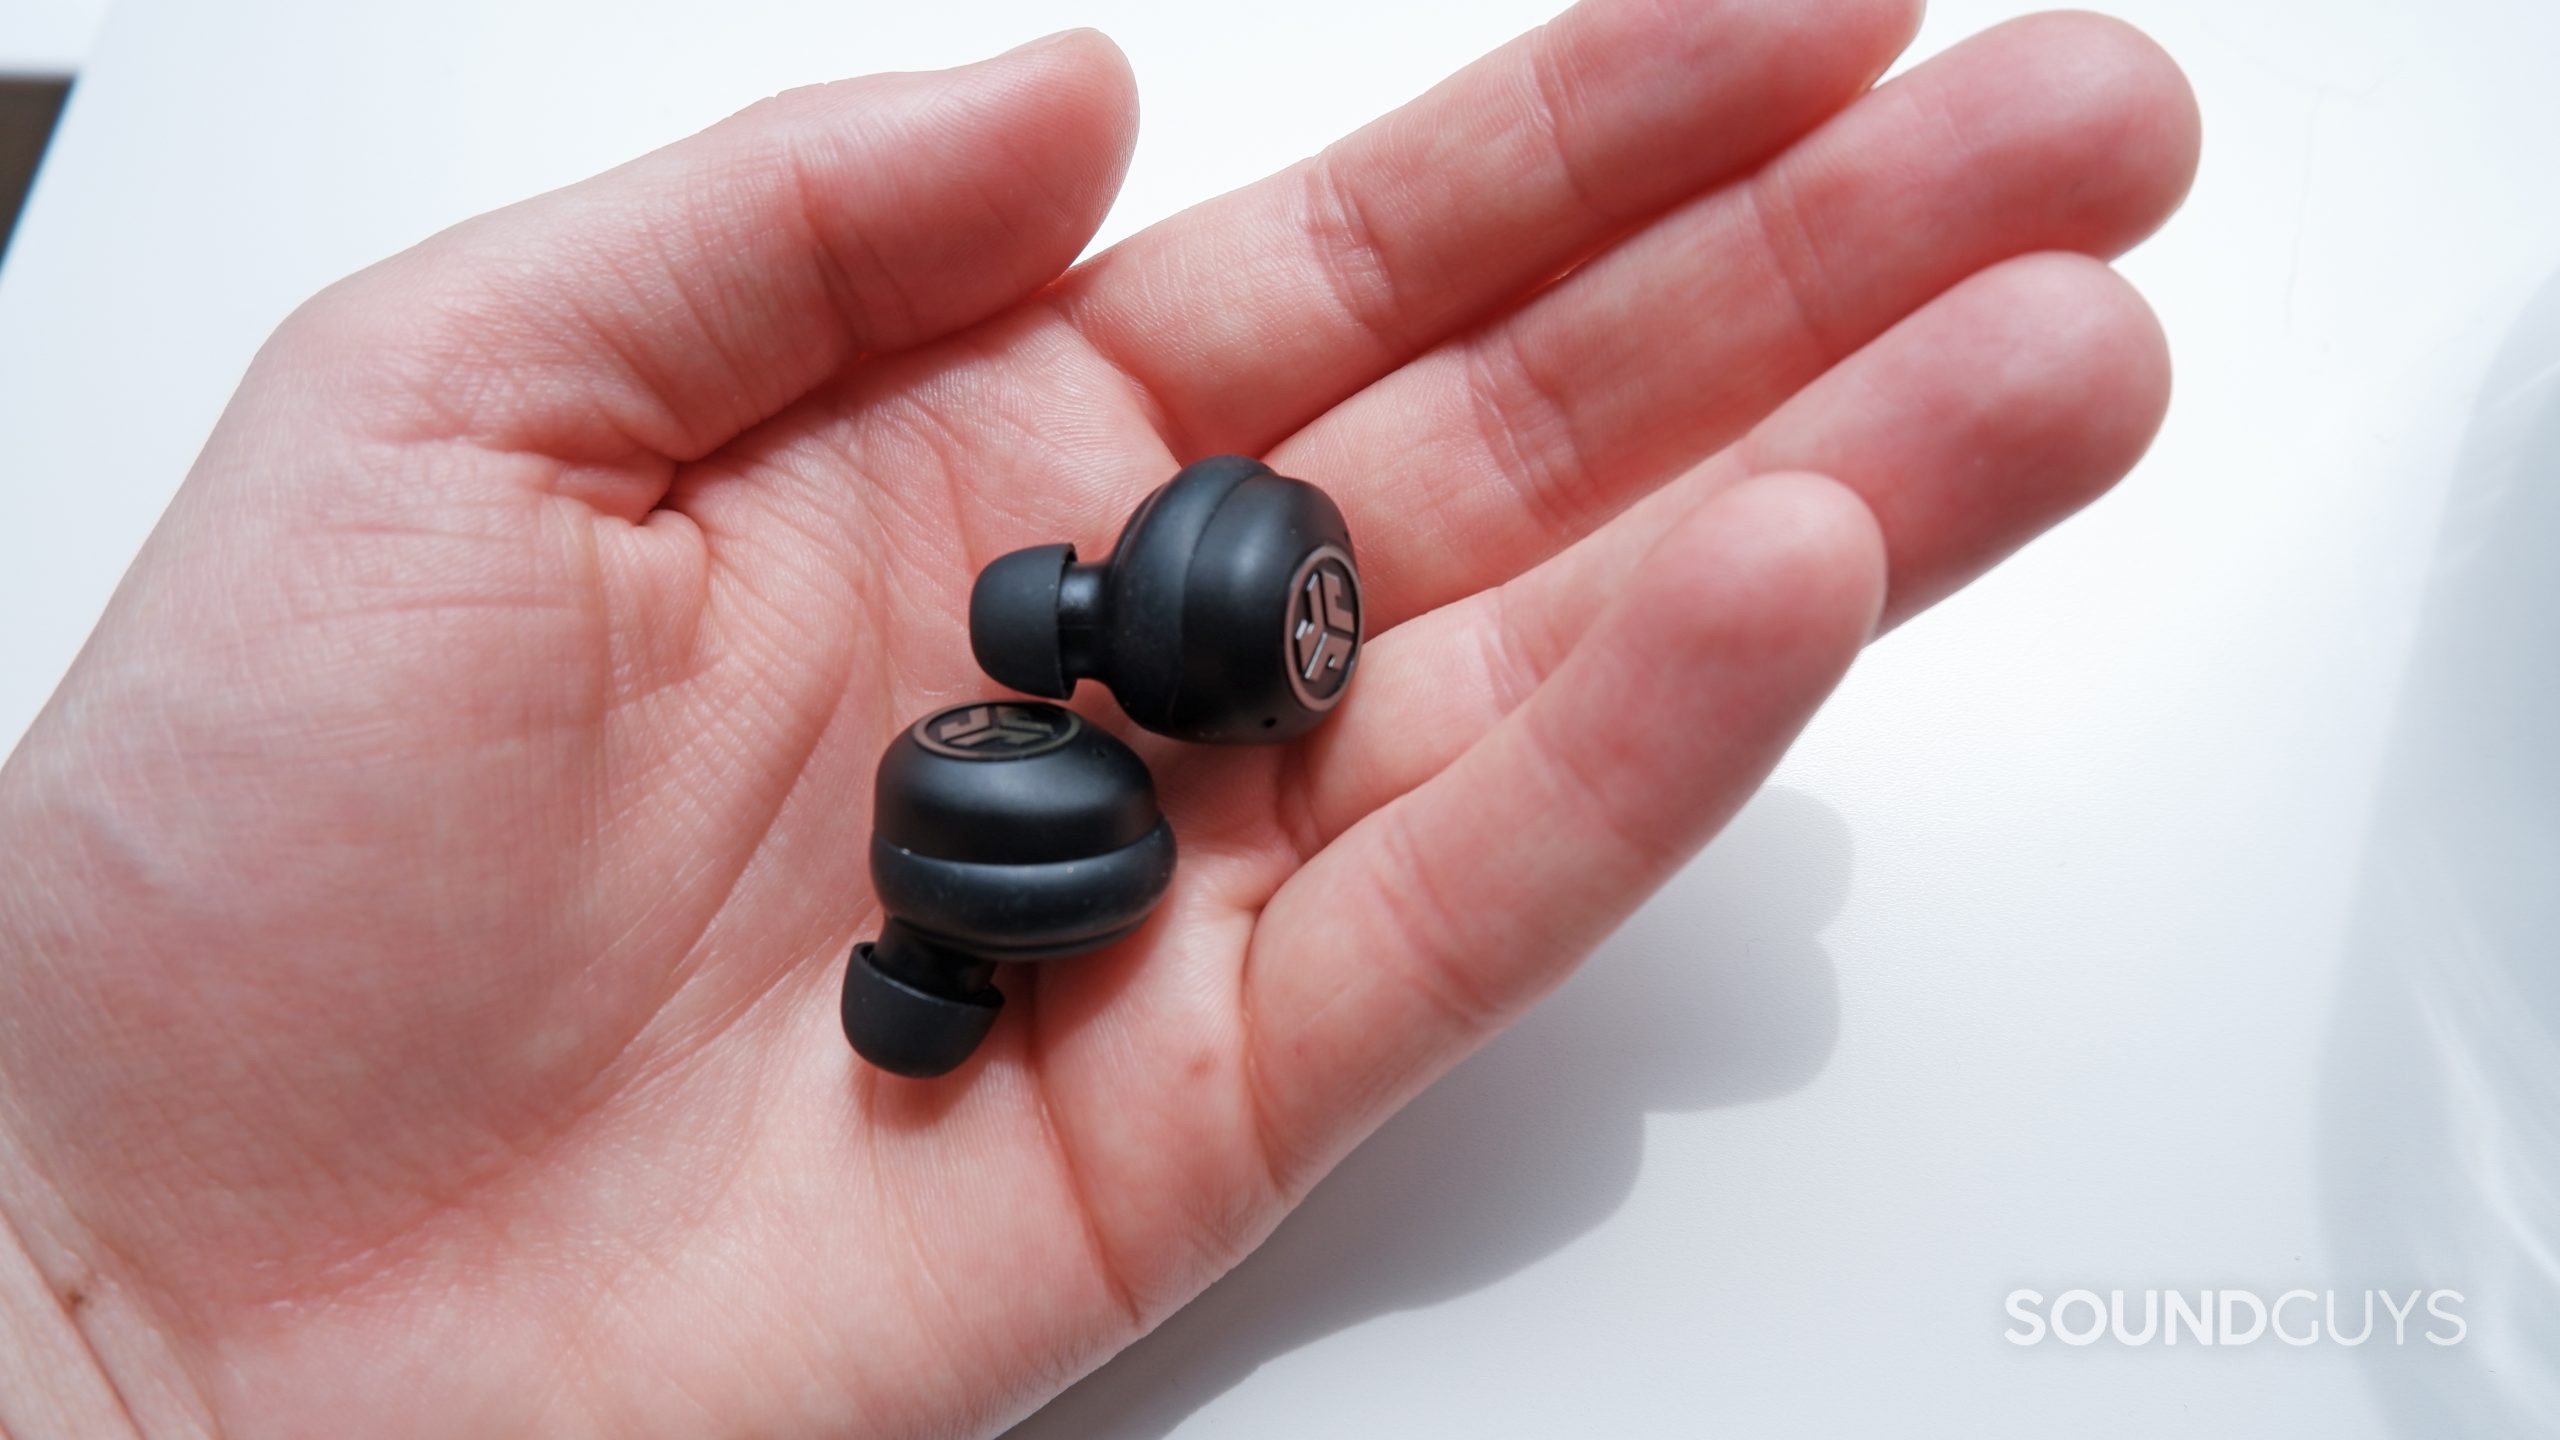 JLab JBuds Air Pro earbuds in a hand.